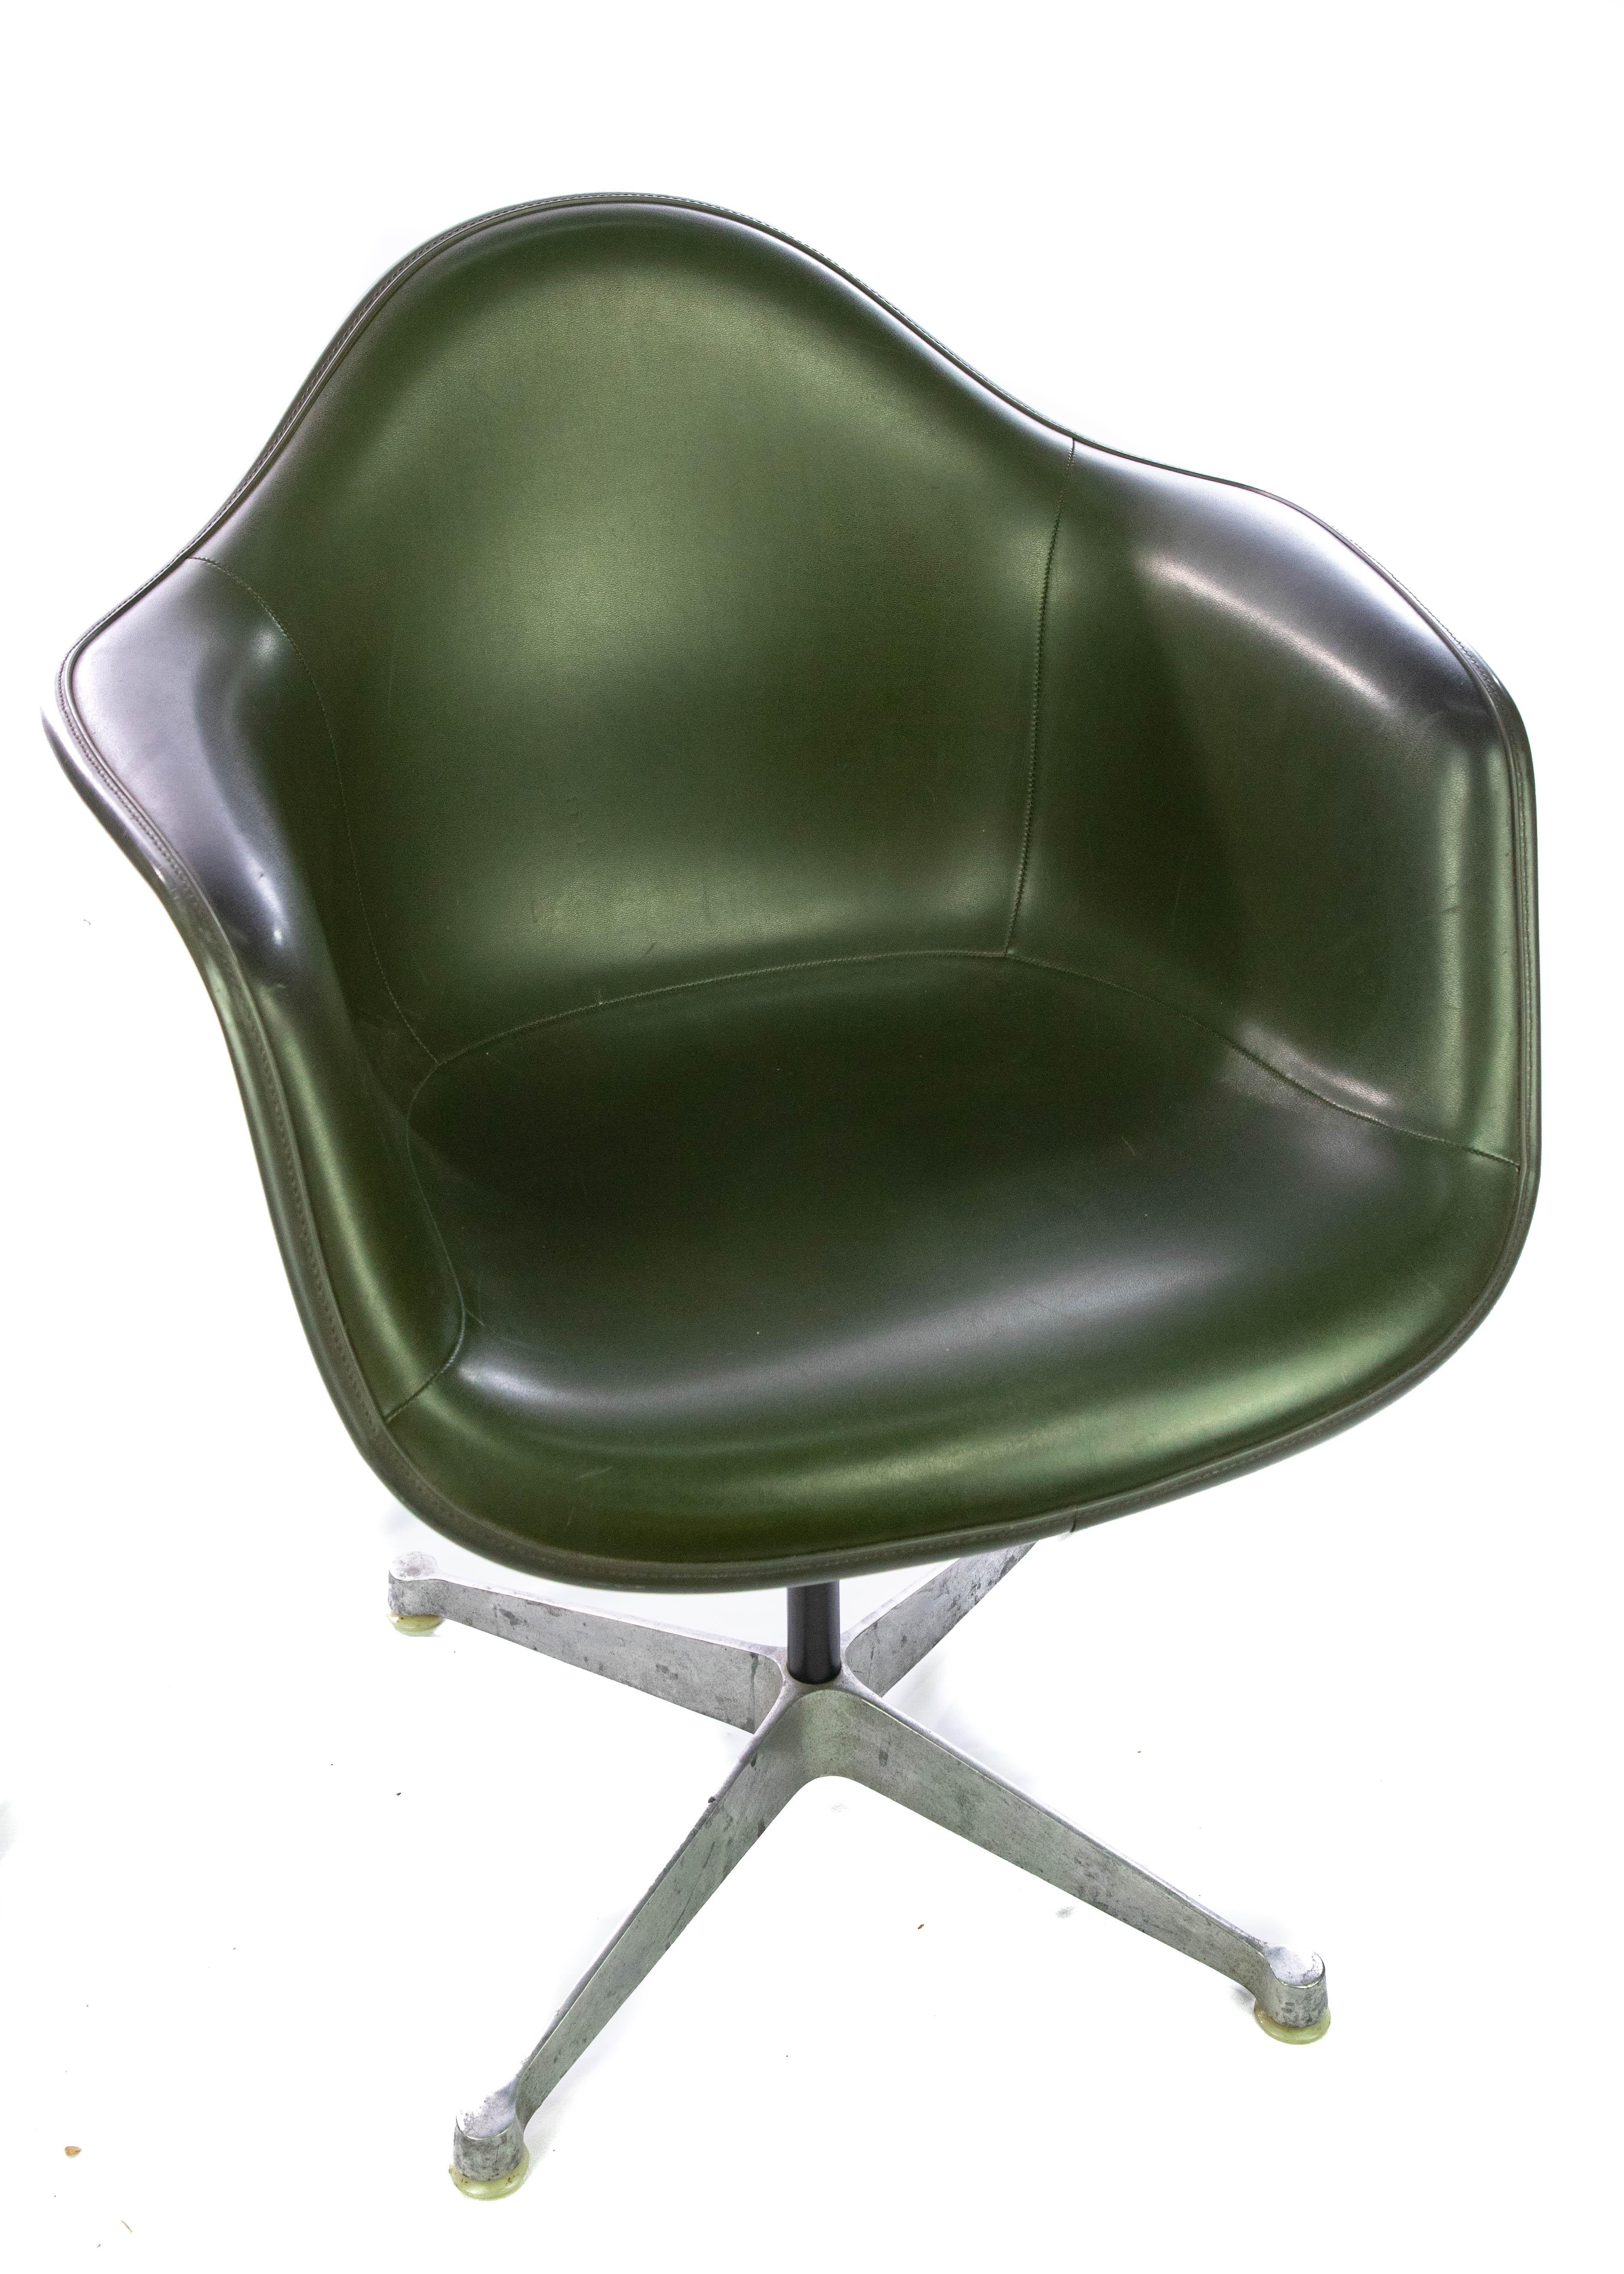 Offering this stunning Eames fiberglass armchair for Herman Miller. This dark green chair will not disappoint! Standing on a star base the fiberglass and upholstery are in almost perfect condition. Great as a side chair or an office chair! All